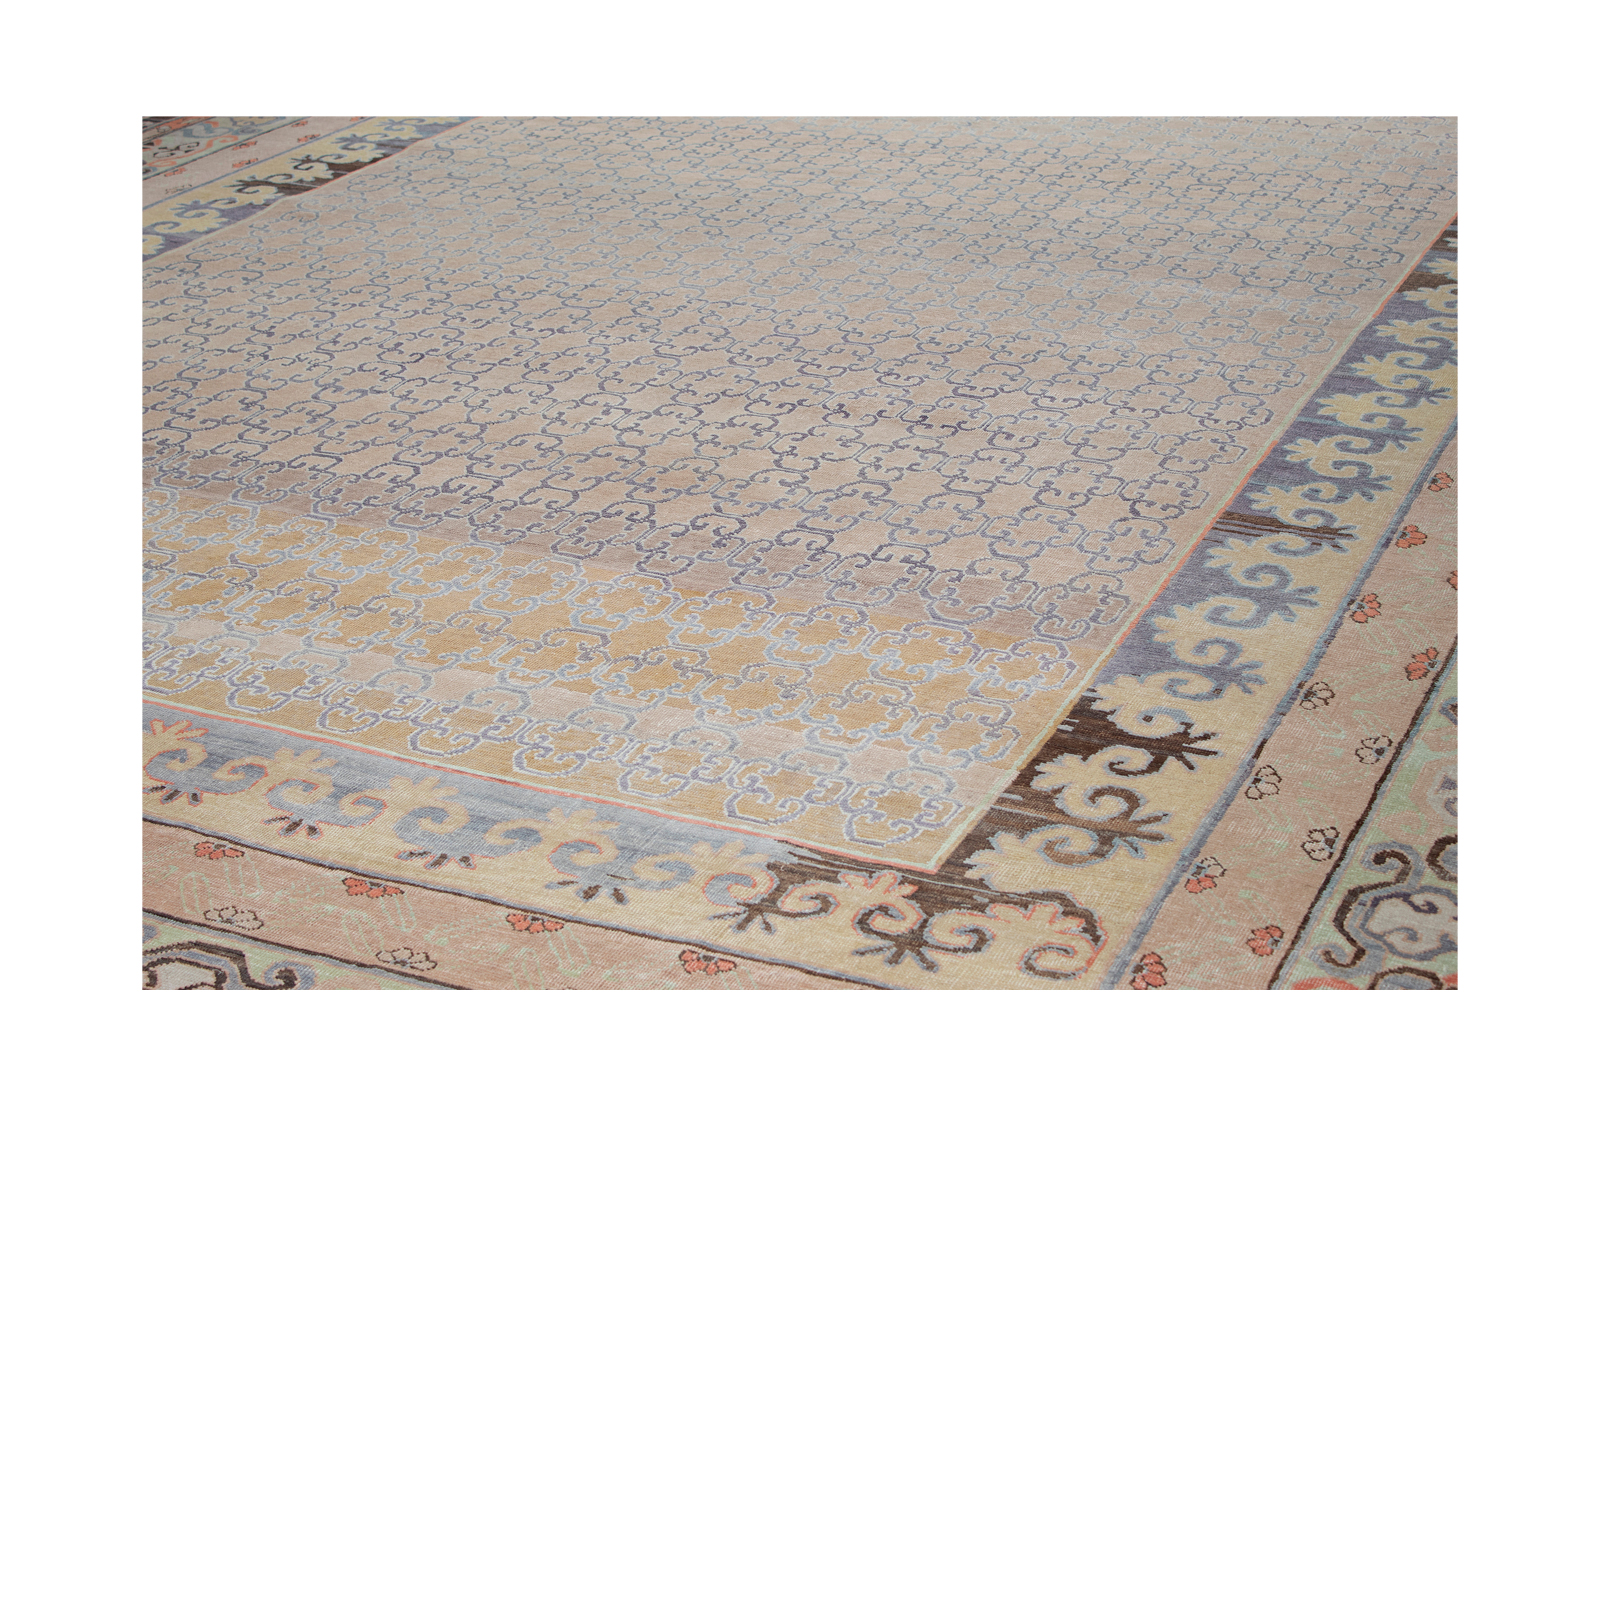  This Sevilla rug is crafted using hand-carded wool and natural dyes. 